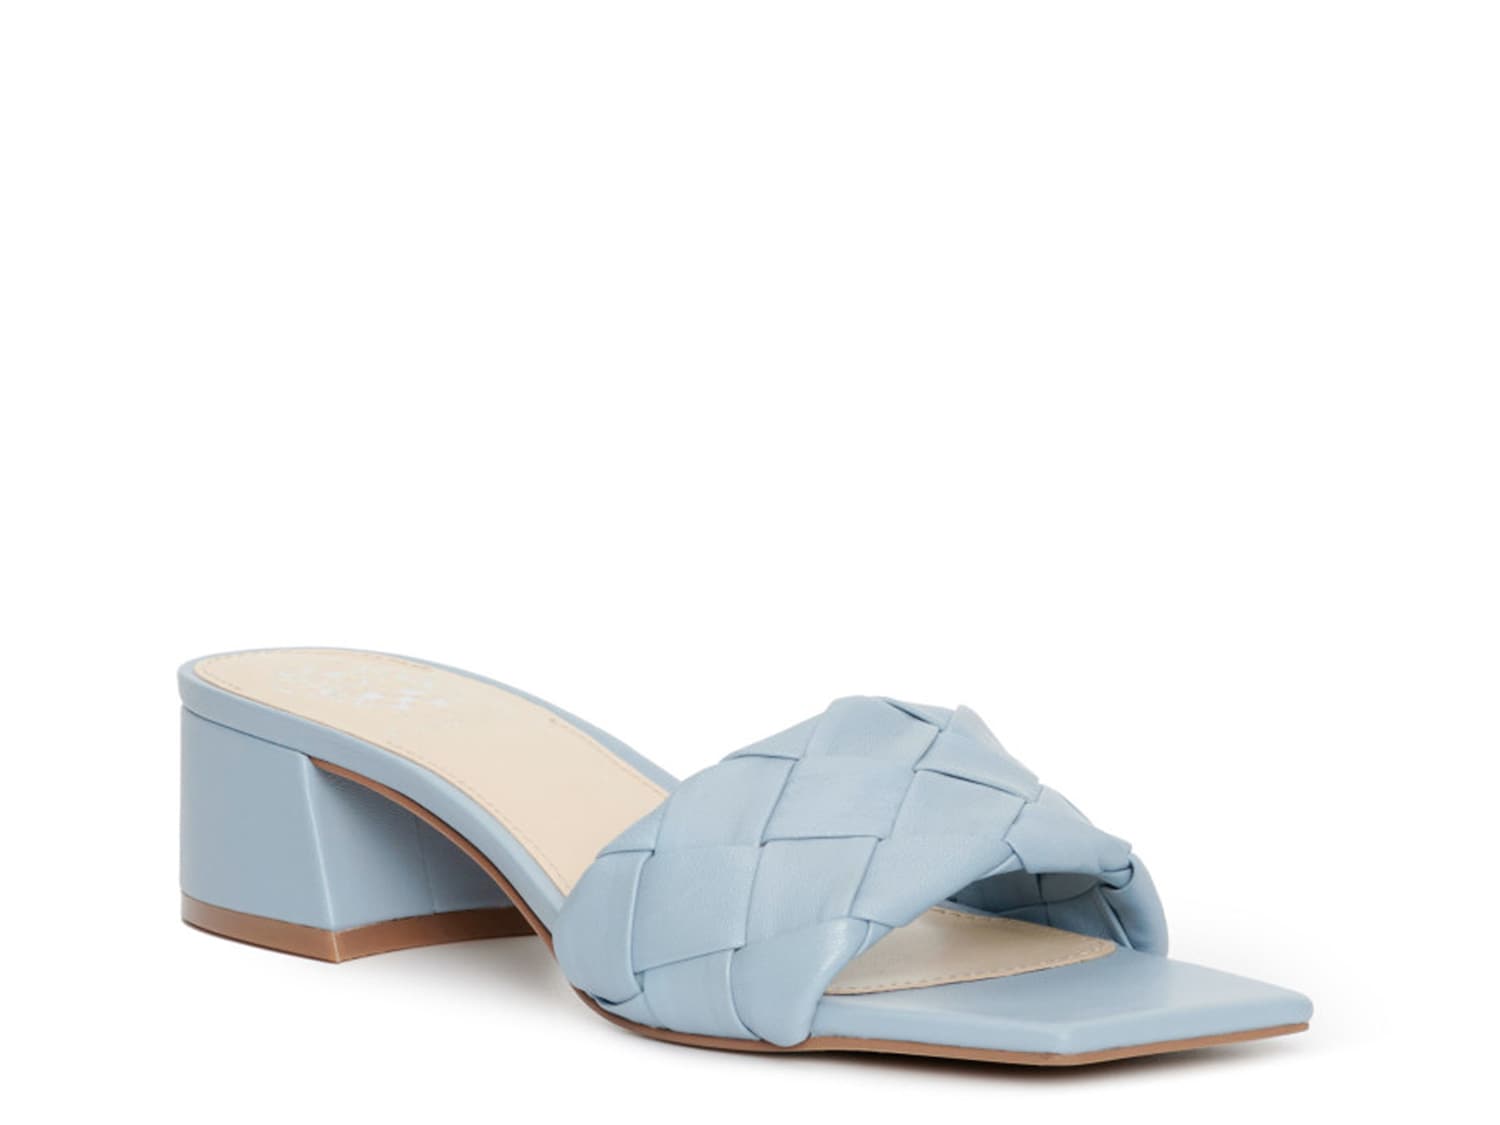 Vince Camuto Semtera Sandal - Free Shipping | DSW